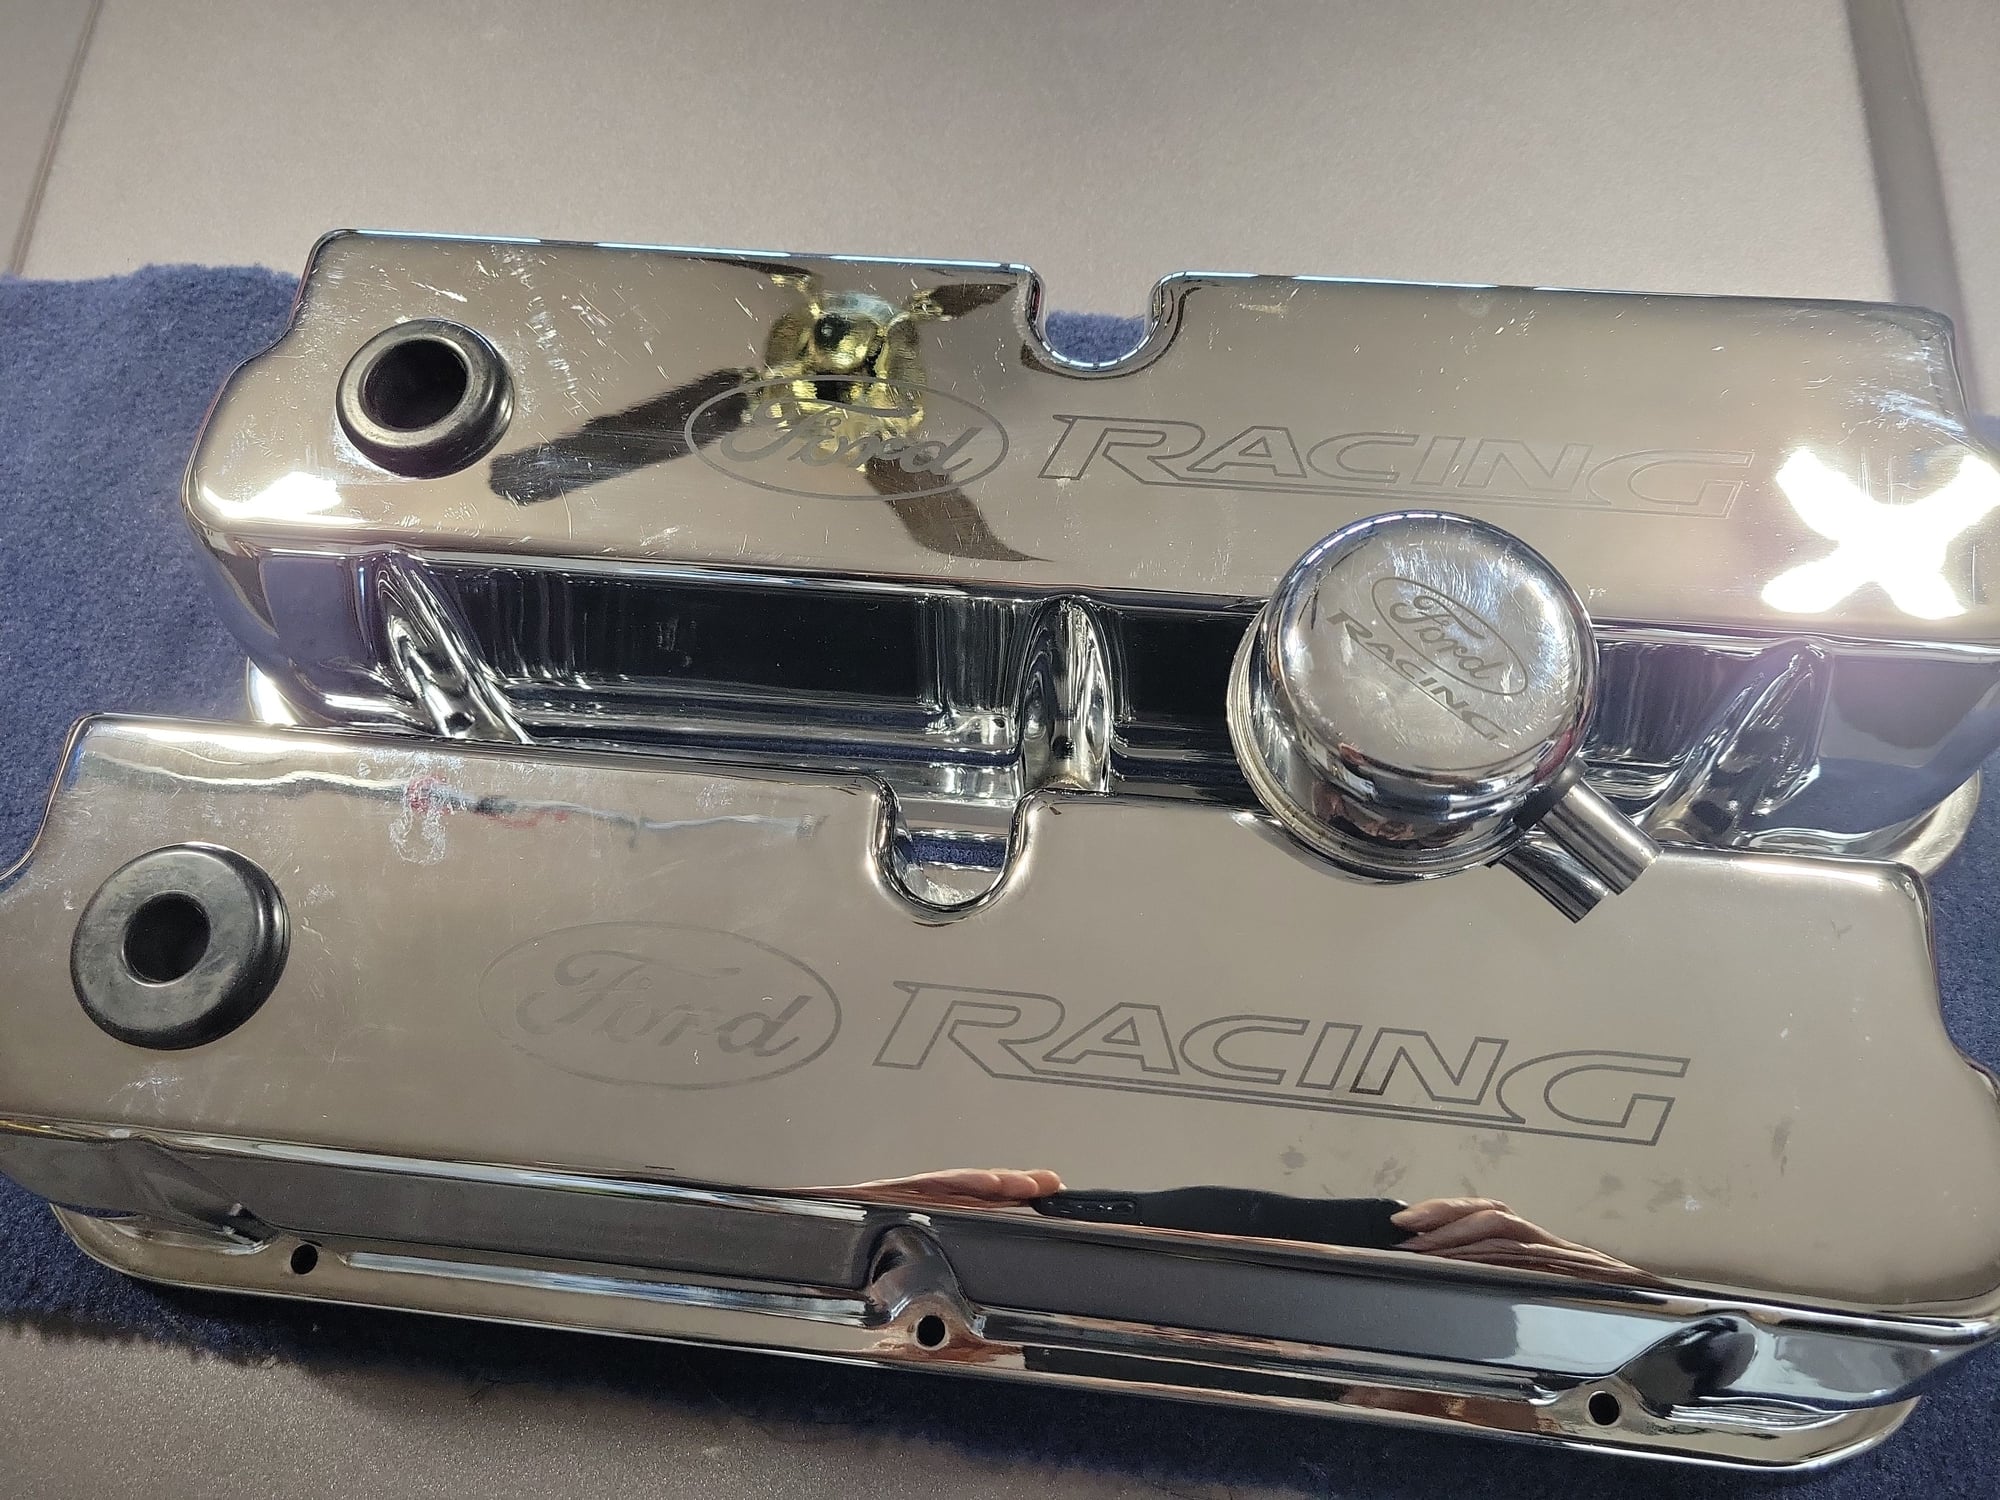 Miscellaneous - Ford Racing Etched Tall Valve Covers - M6582LE302C. - New - -1 to 2025  All Models - Lethbridge, AB T1H1E2, Canada